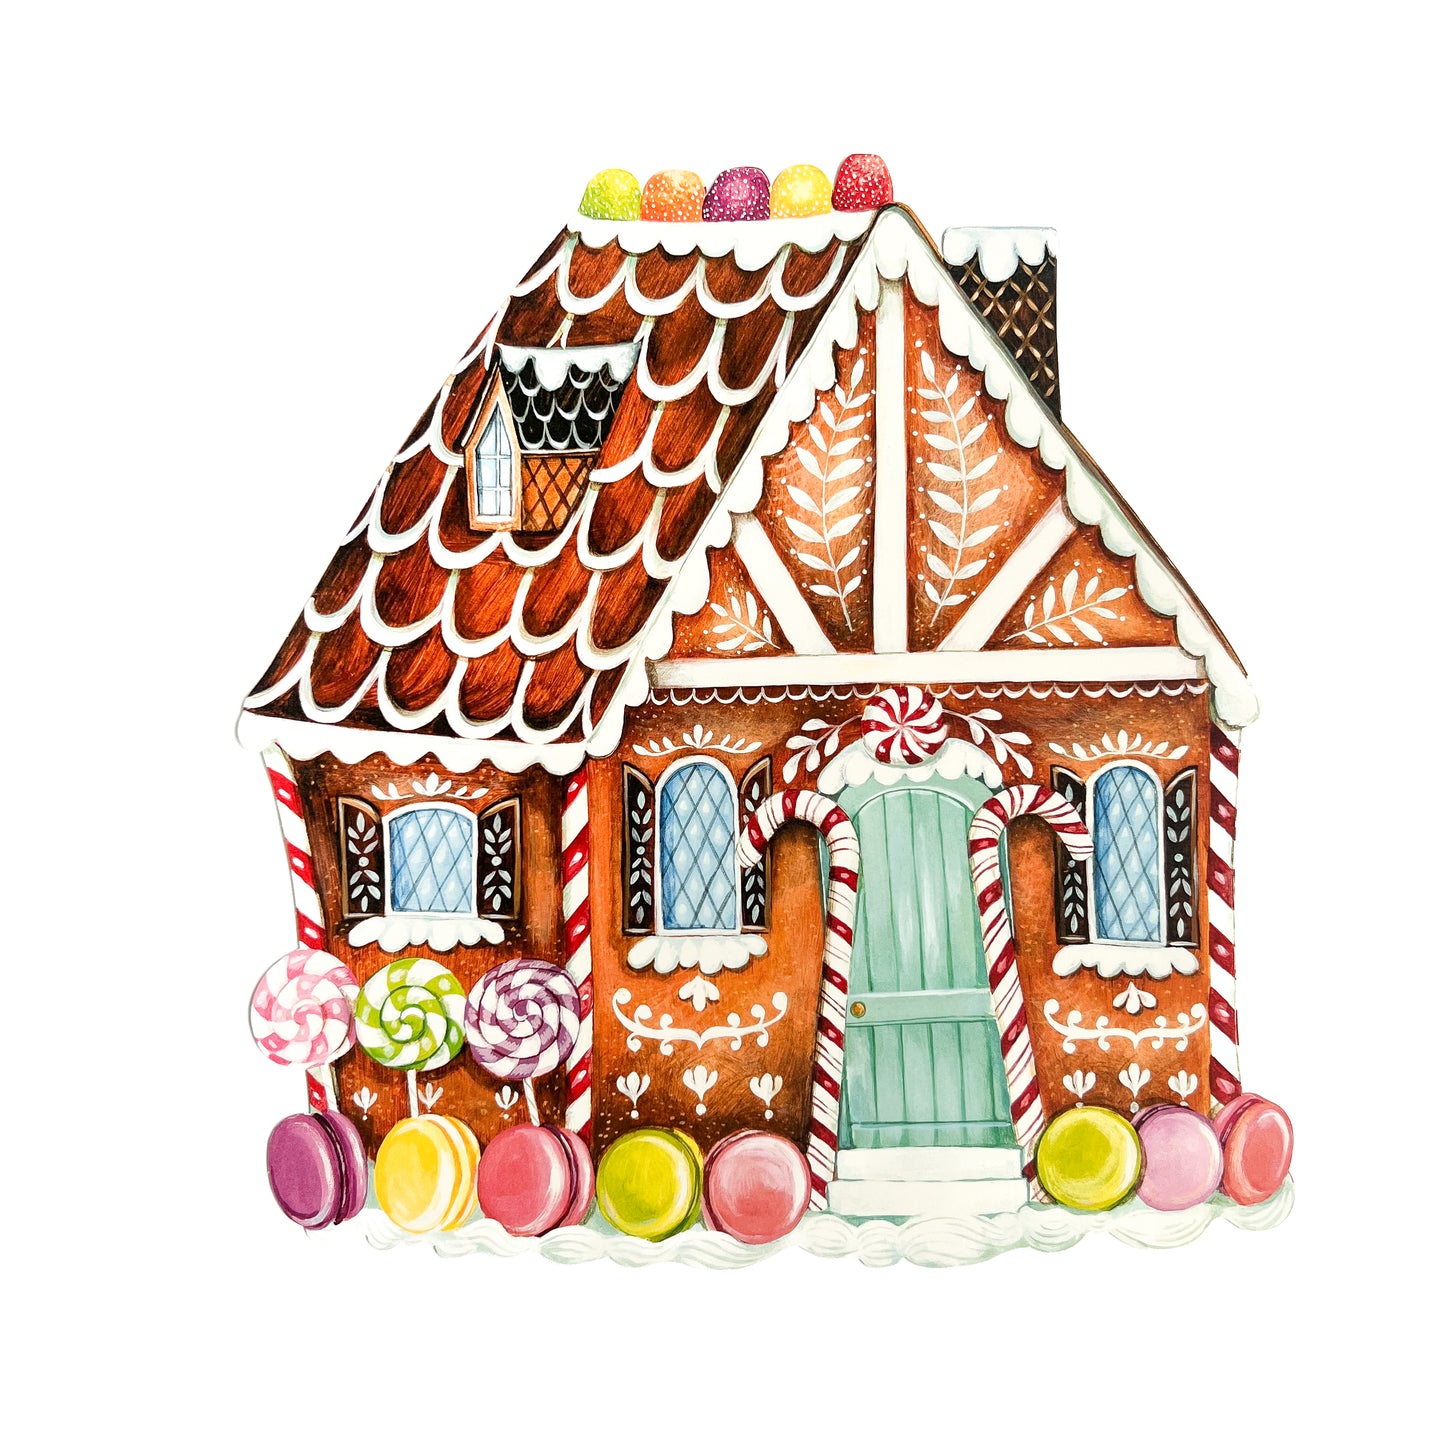 Die Cut Gingerbread House Placemats